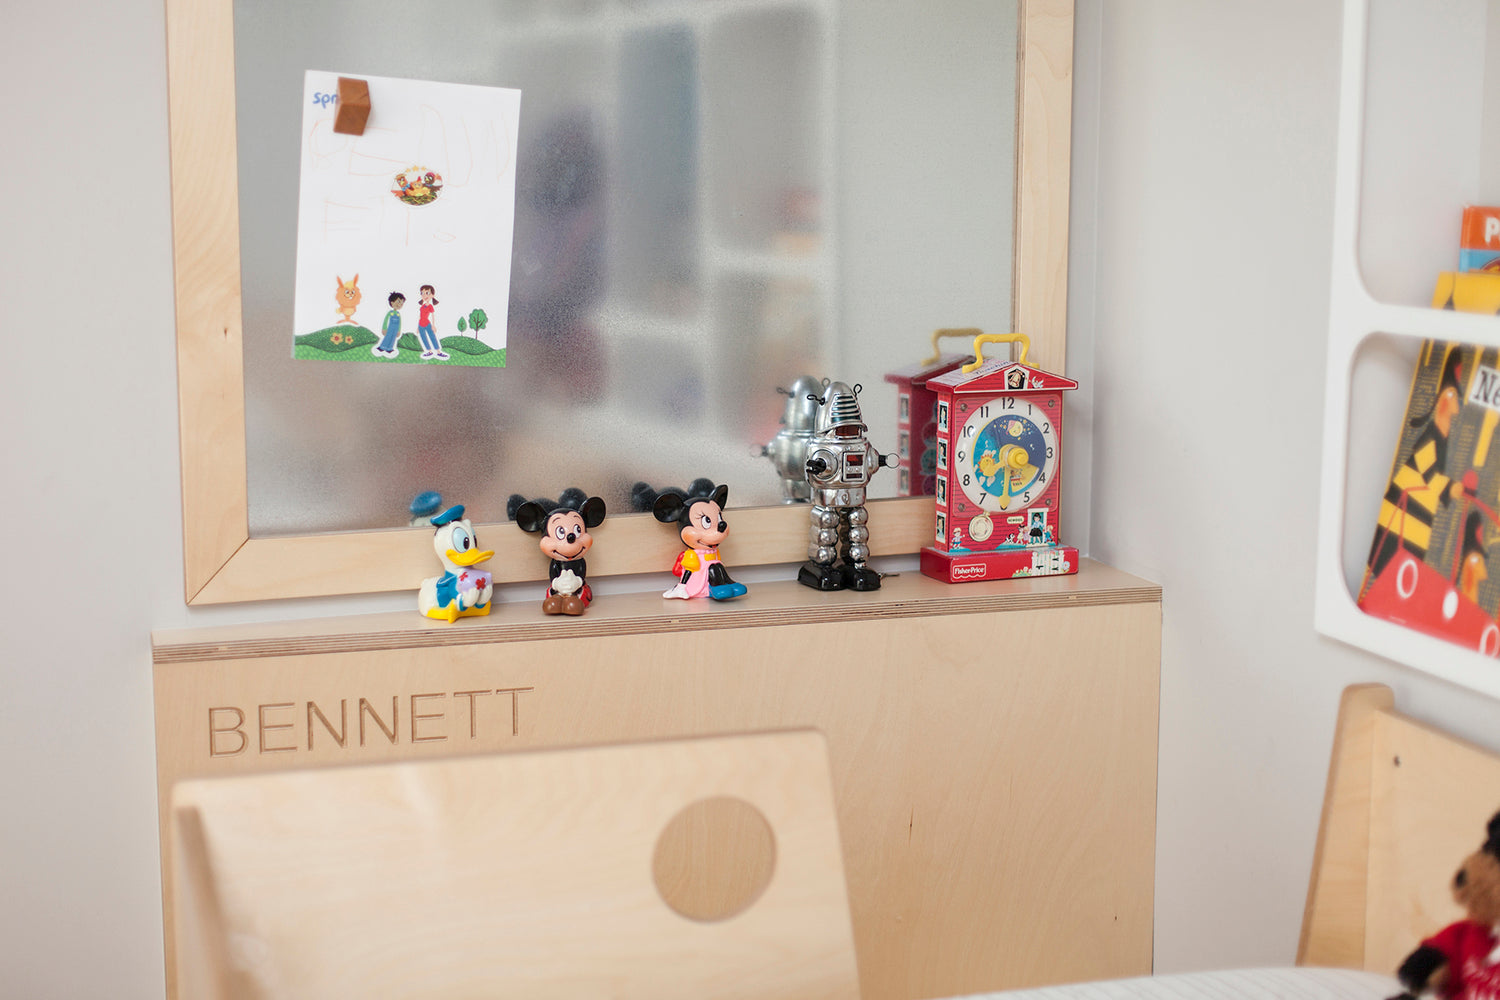 Child’s room shelf with toys, Mickey figures, name ‘BENNETT’